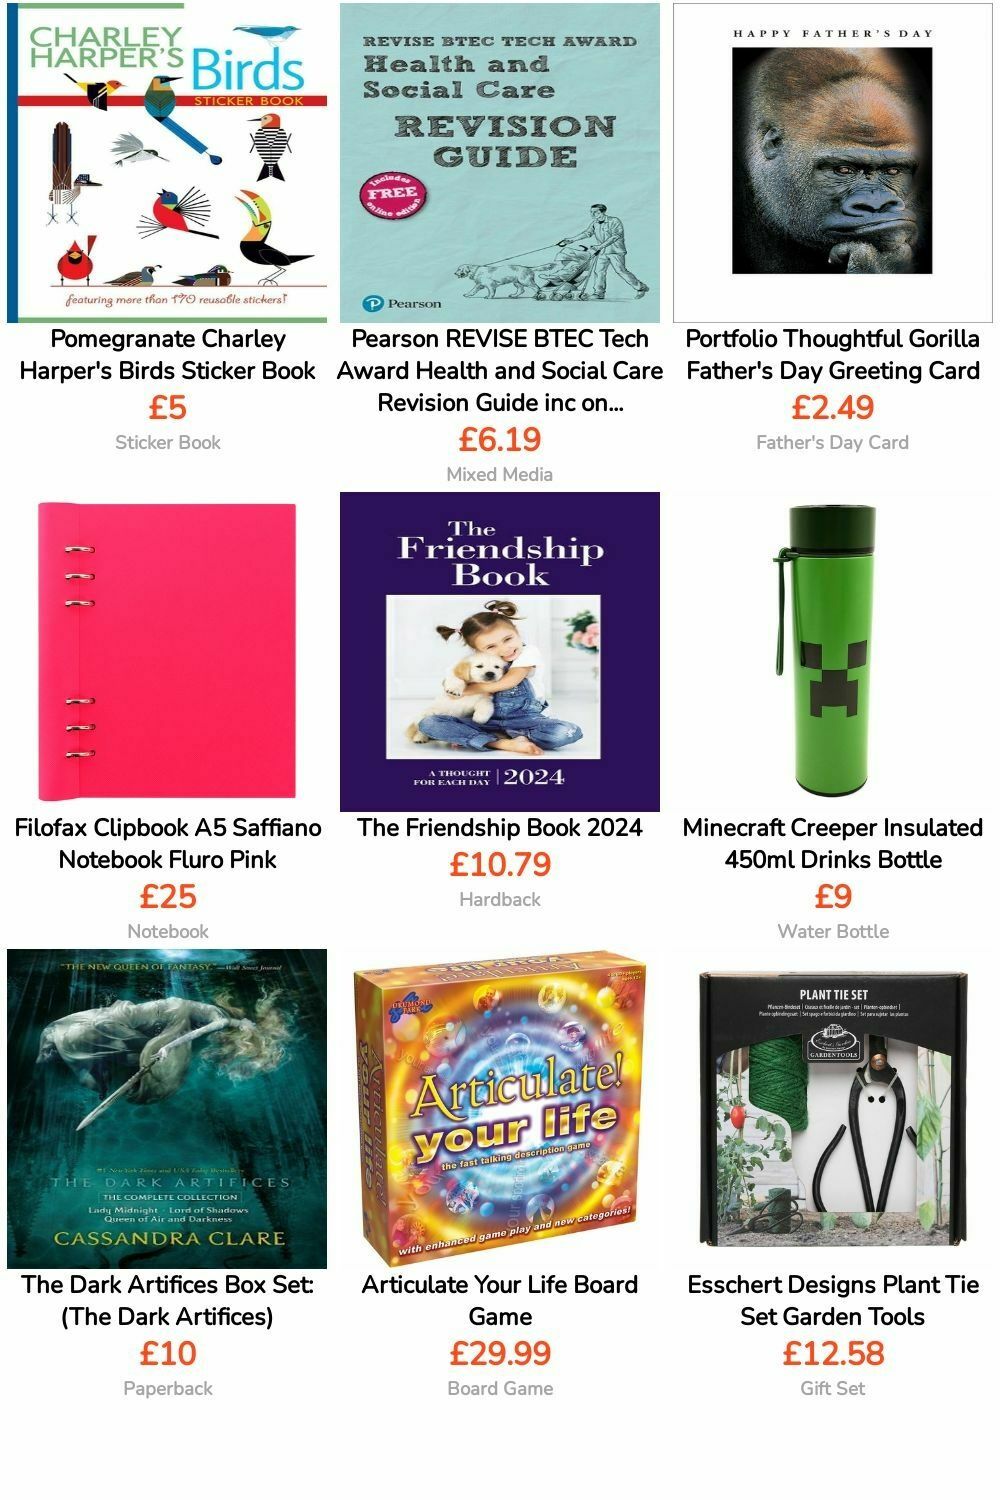 WHSmith Offers from 13 February